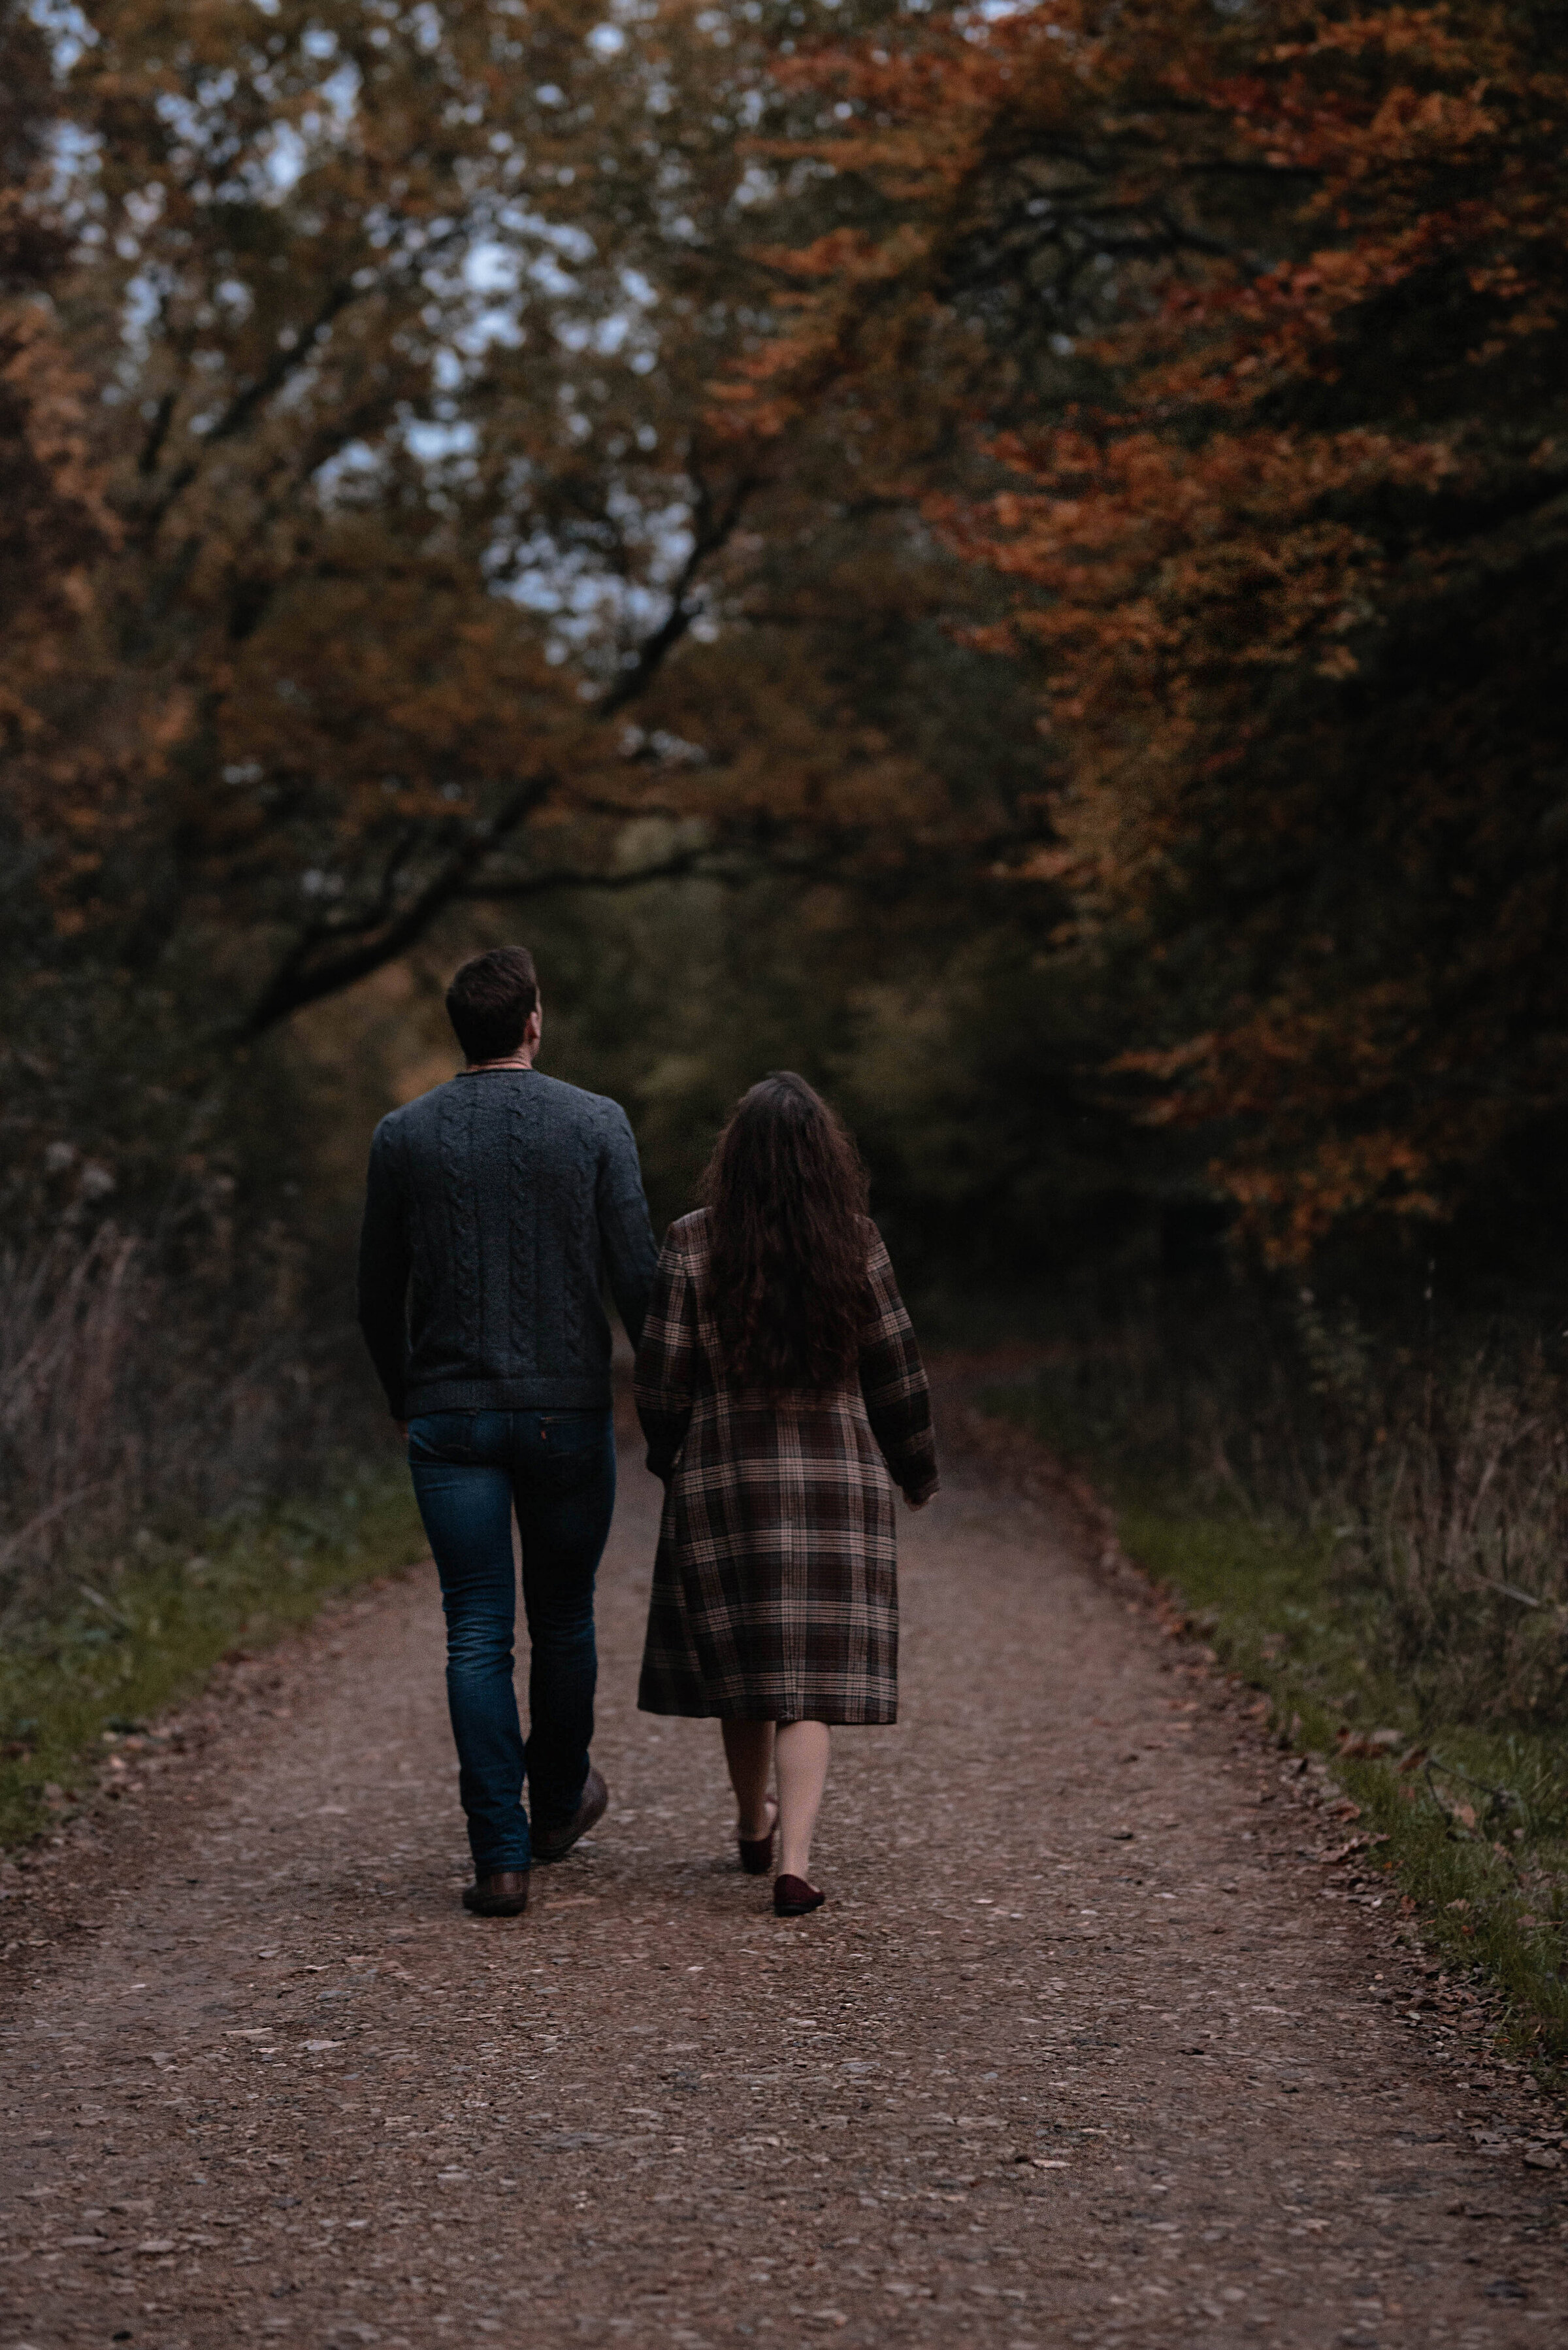 Man and woman walking away hand in hand surrounded by an autumnal scene of orange trees and fallen leaves